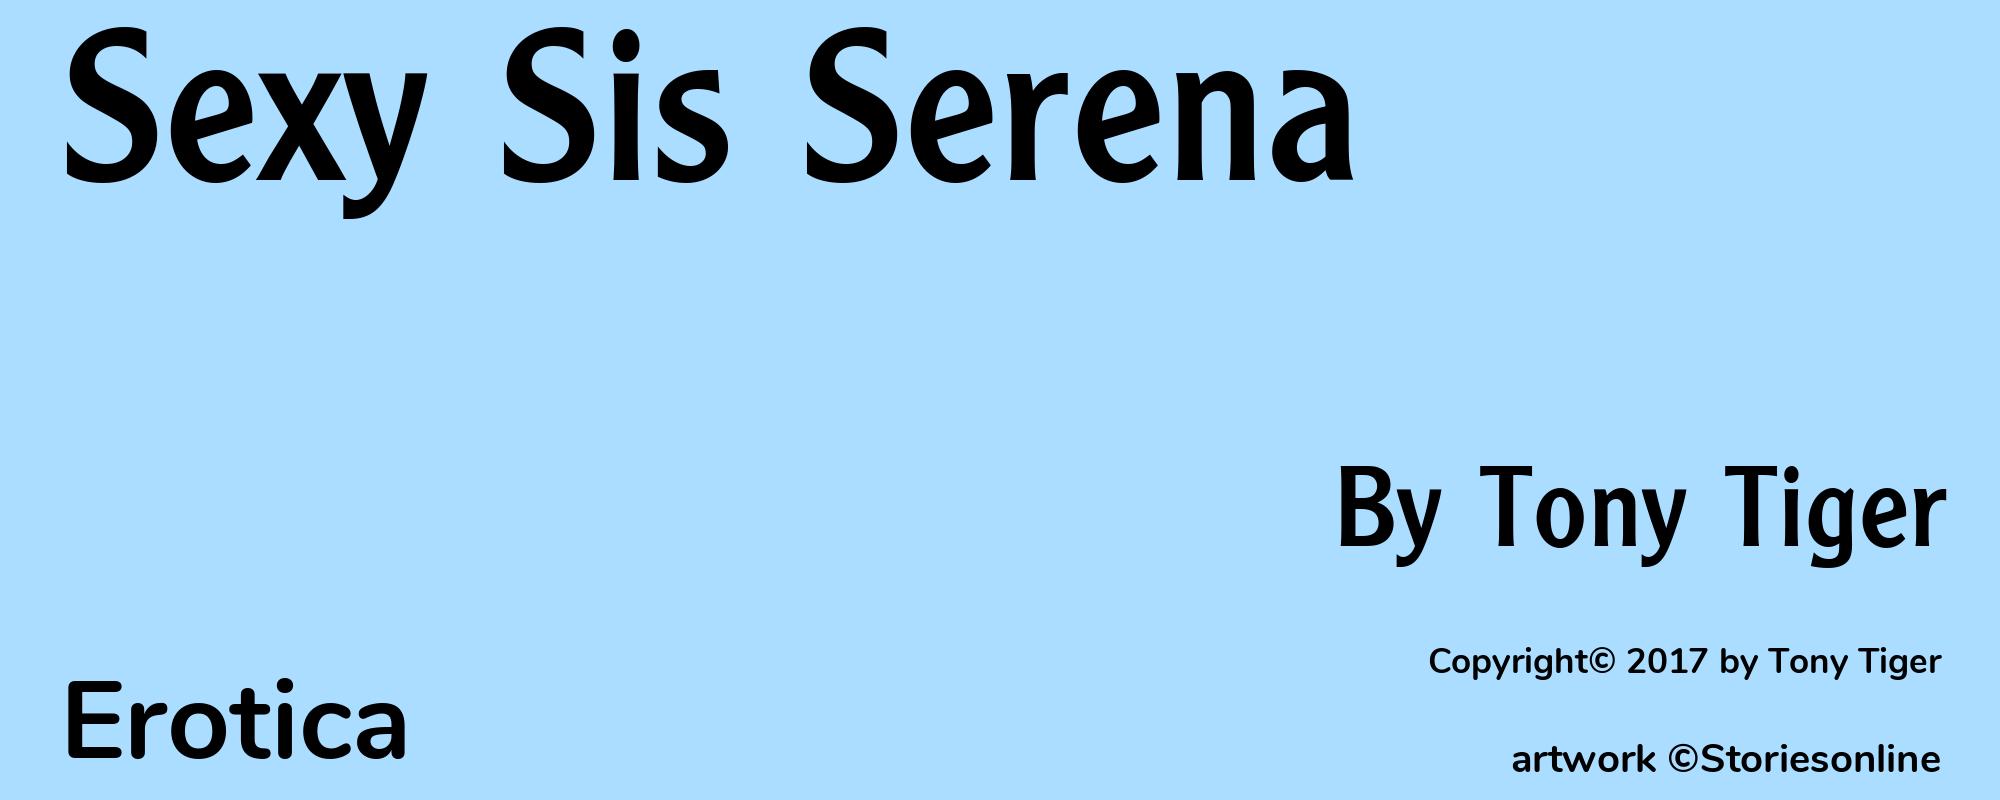 Sexy Sis Serena - Cover